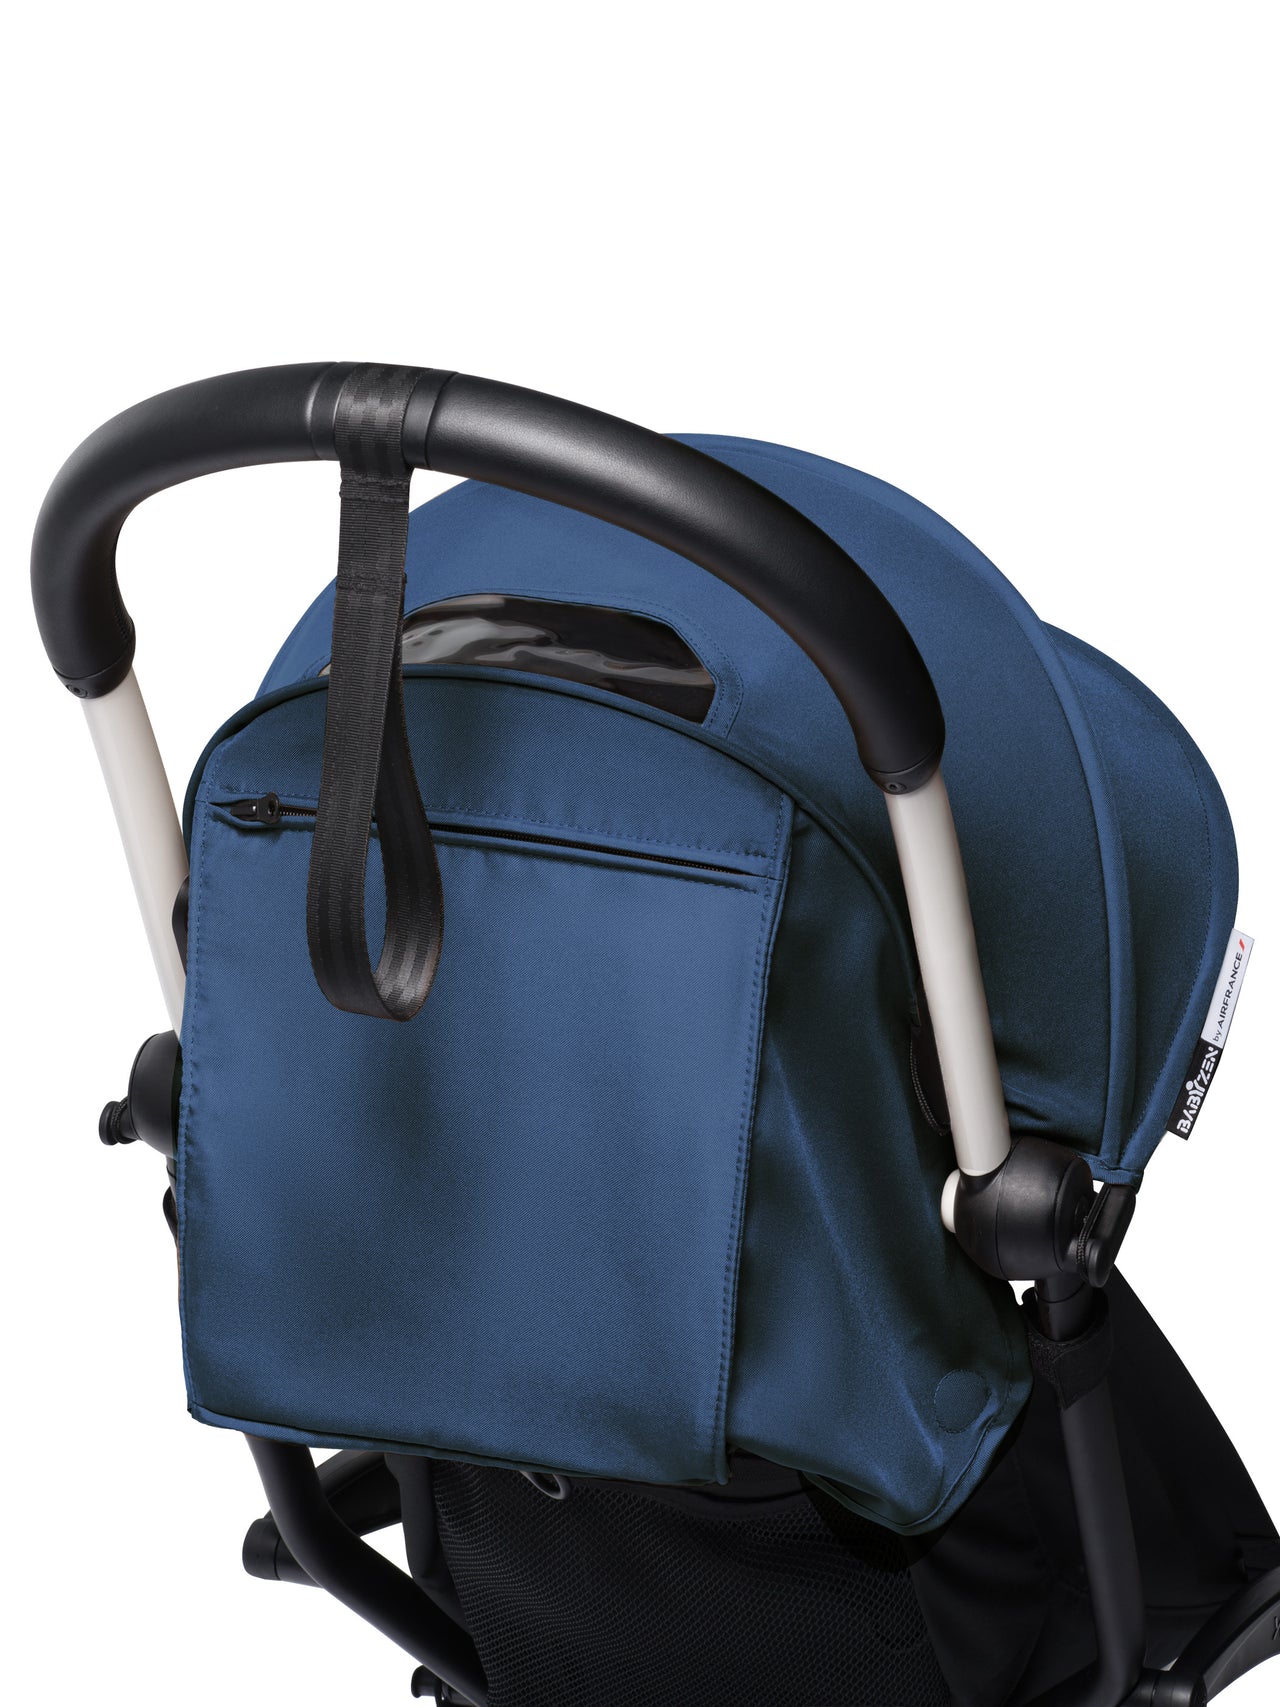 BABYZEN YOYO² 6+ Stroller (White Frame)- Air France Blue with FREE BACKPACK!